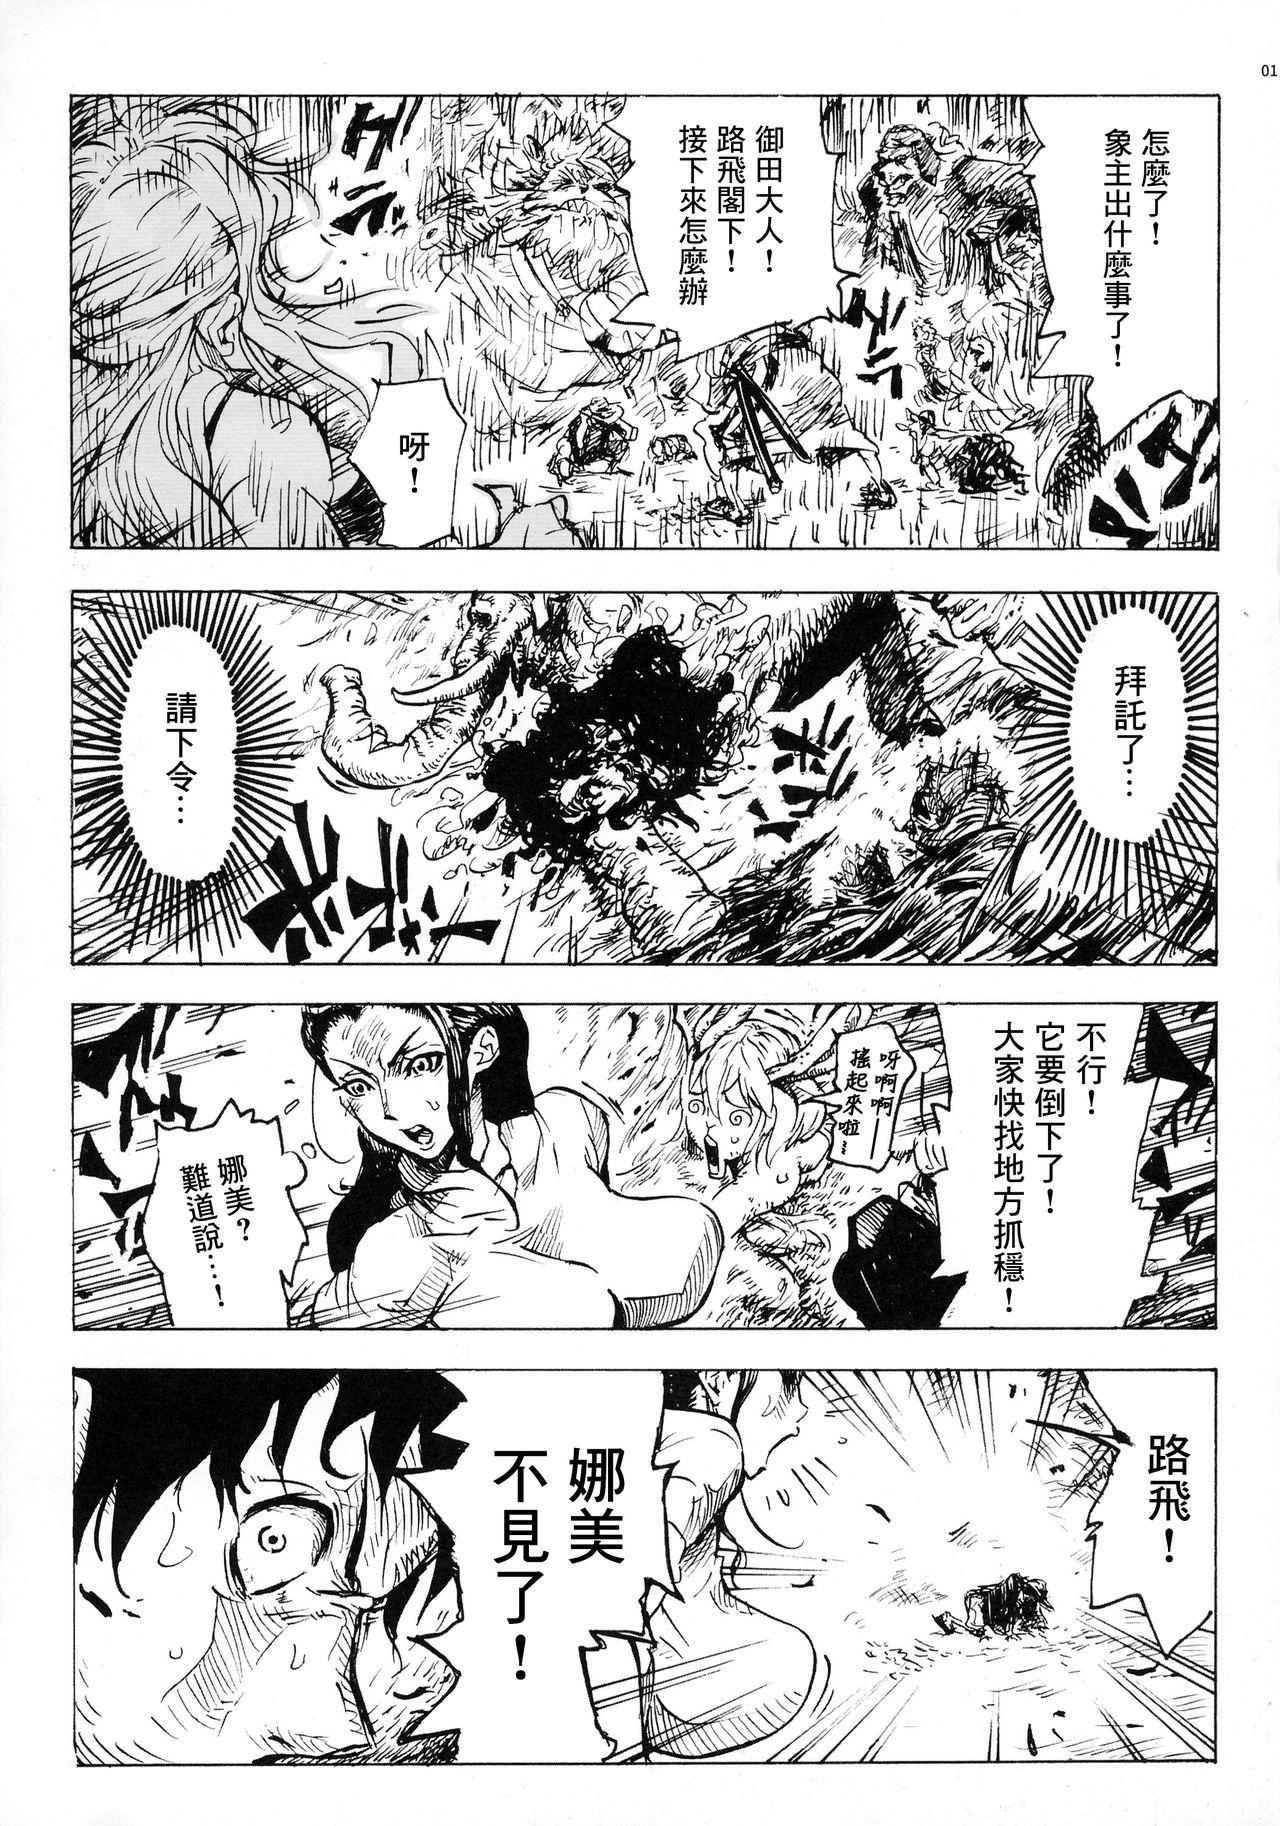 Special Locations P.O.M Another Episode "J.A.C.K" - One piece Wam - Page 4